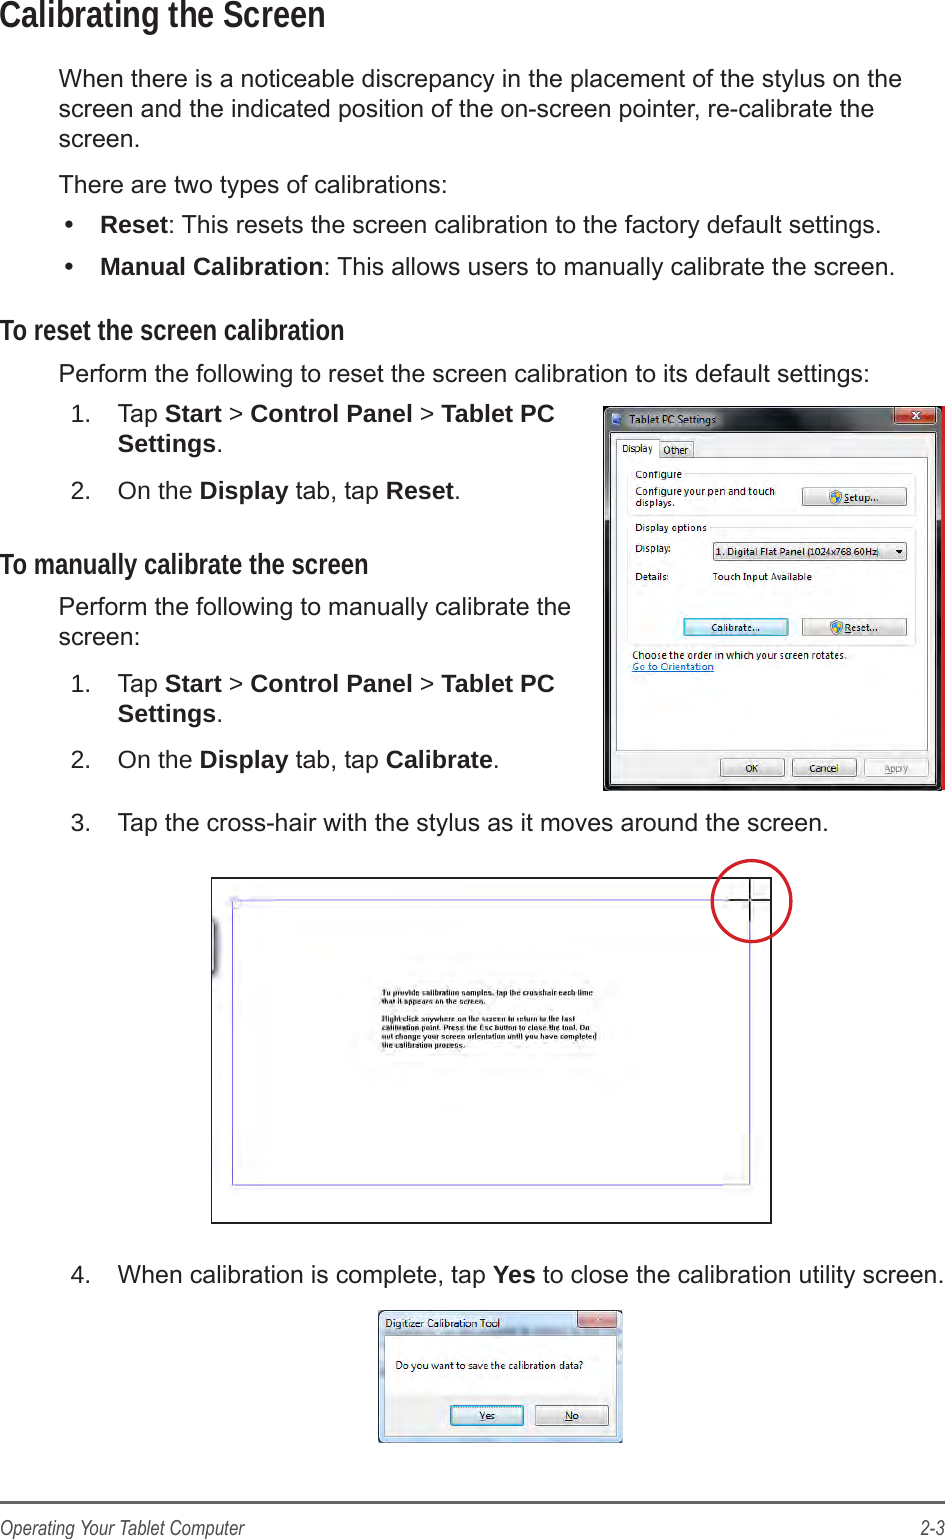 2-3Operating Your Tablet ComputerCalibrating the ScreenWhen there is a noticeable discrepancy in the placement of the stylus on the screen and the indicated position of the on-screen pointer, re-calibrate the screen.There are two types of calibrations:•  Reset: This resets the screen calibration to the factory default settings.•  Manual Calibration: This allows users to manually calibrate the screen.To reset the screen calibrationPerform the following to reset the screen calibration to its default settings:1.  Tap Start &gt; Control Panel &gt; Tablet PC Settings.2.  On the Display tab, tap Reset.To manually calibrate the screenPerform the following to manually calibrate the screen:1.  Tap Start &gt; Control Panel &gt; Tablet PC Settings.2.  On the Display tab, tap Calibrate.3.  Tap the cross-hair with the stylus as it moves around the screen.4.  When calibration is complete, tap Yes to close the calibration utility screen.